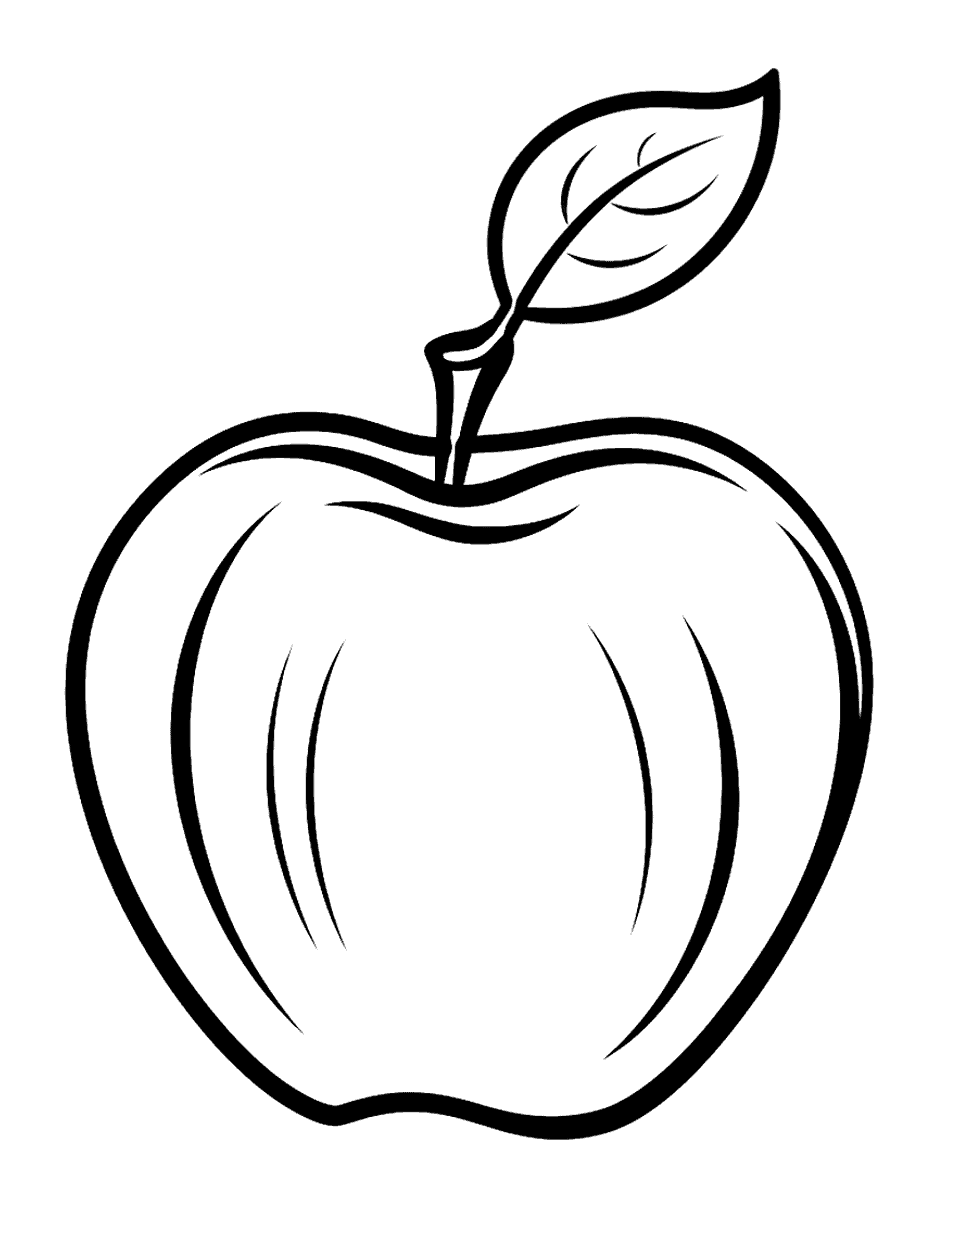 Toddler’s First Apple Coloring Page - A simple, large apple shape, easy for toddlers to color.